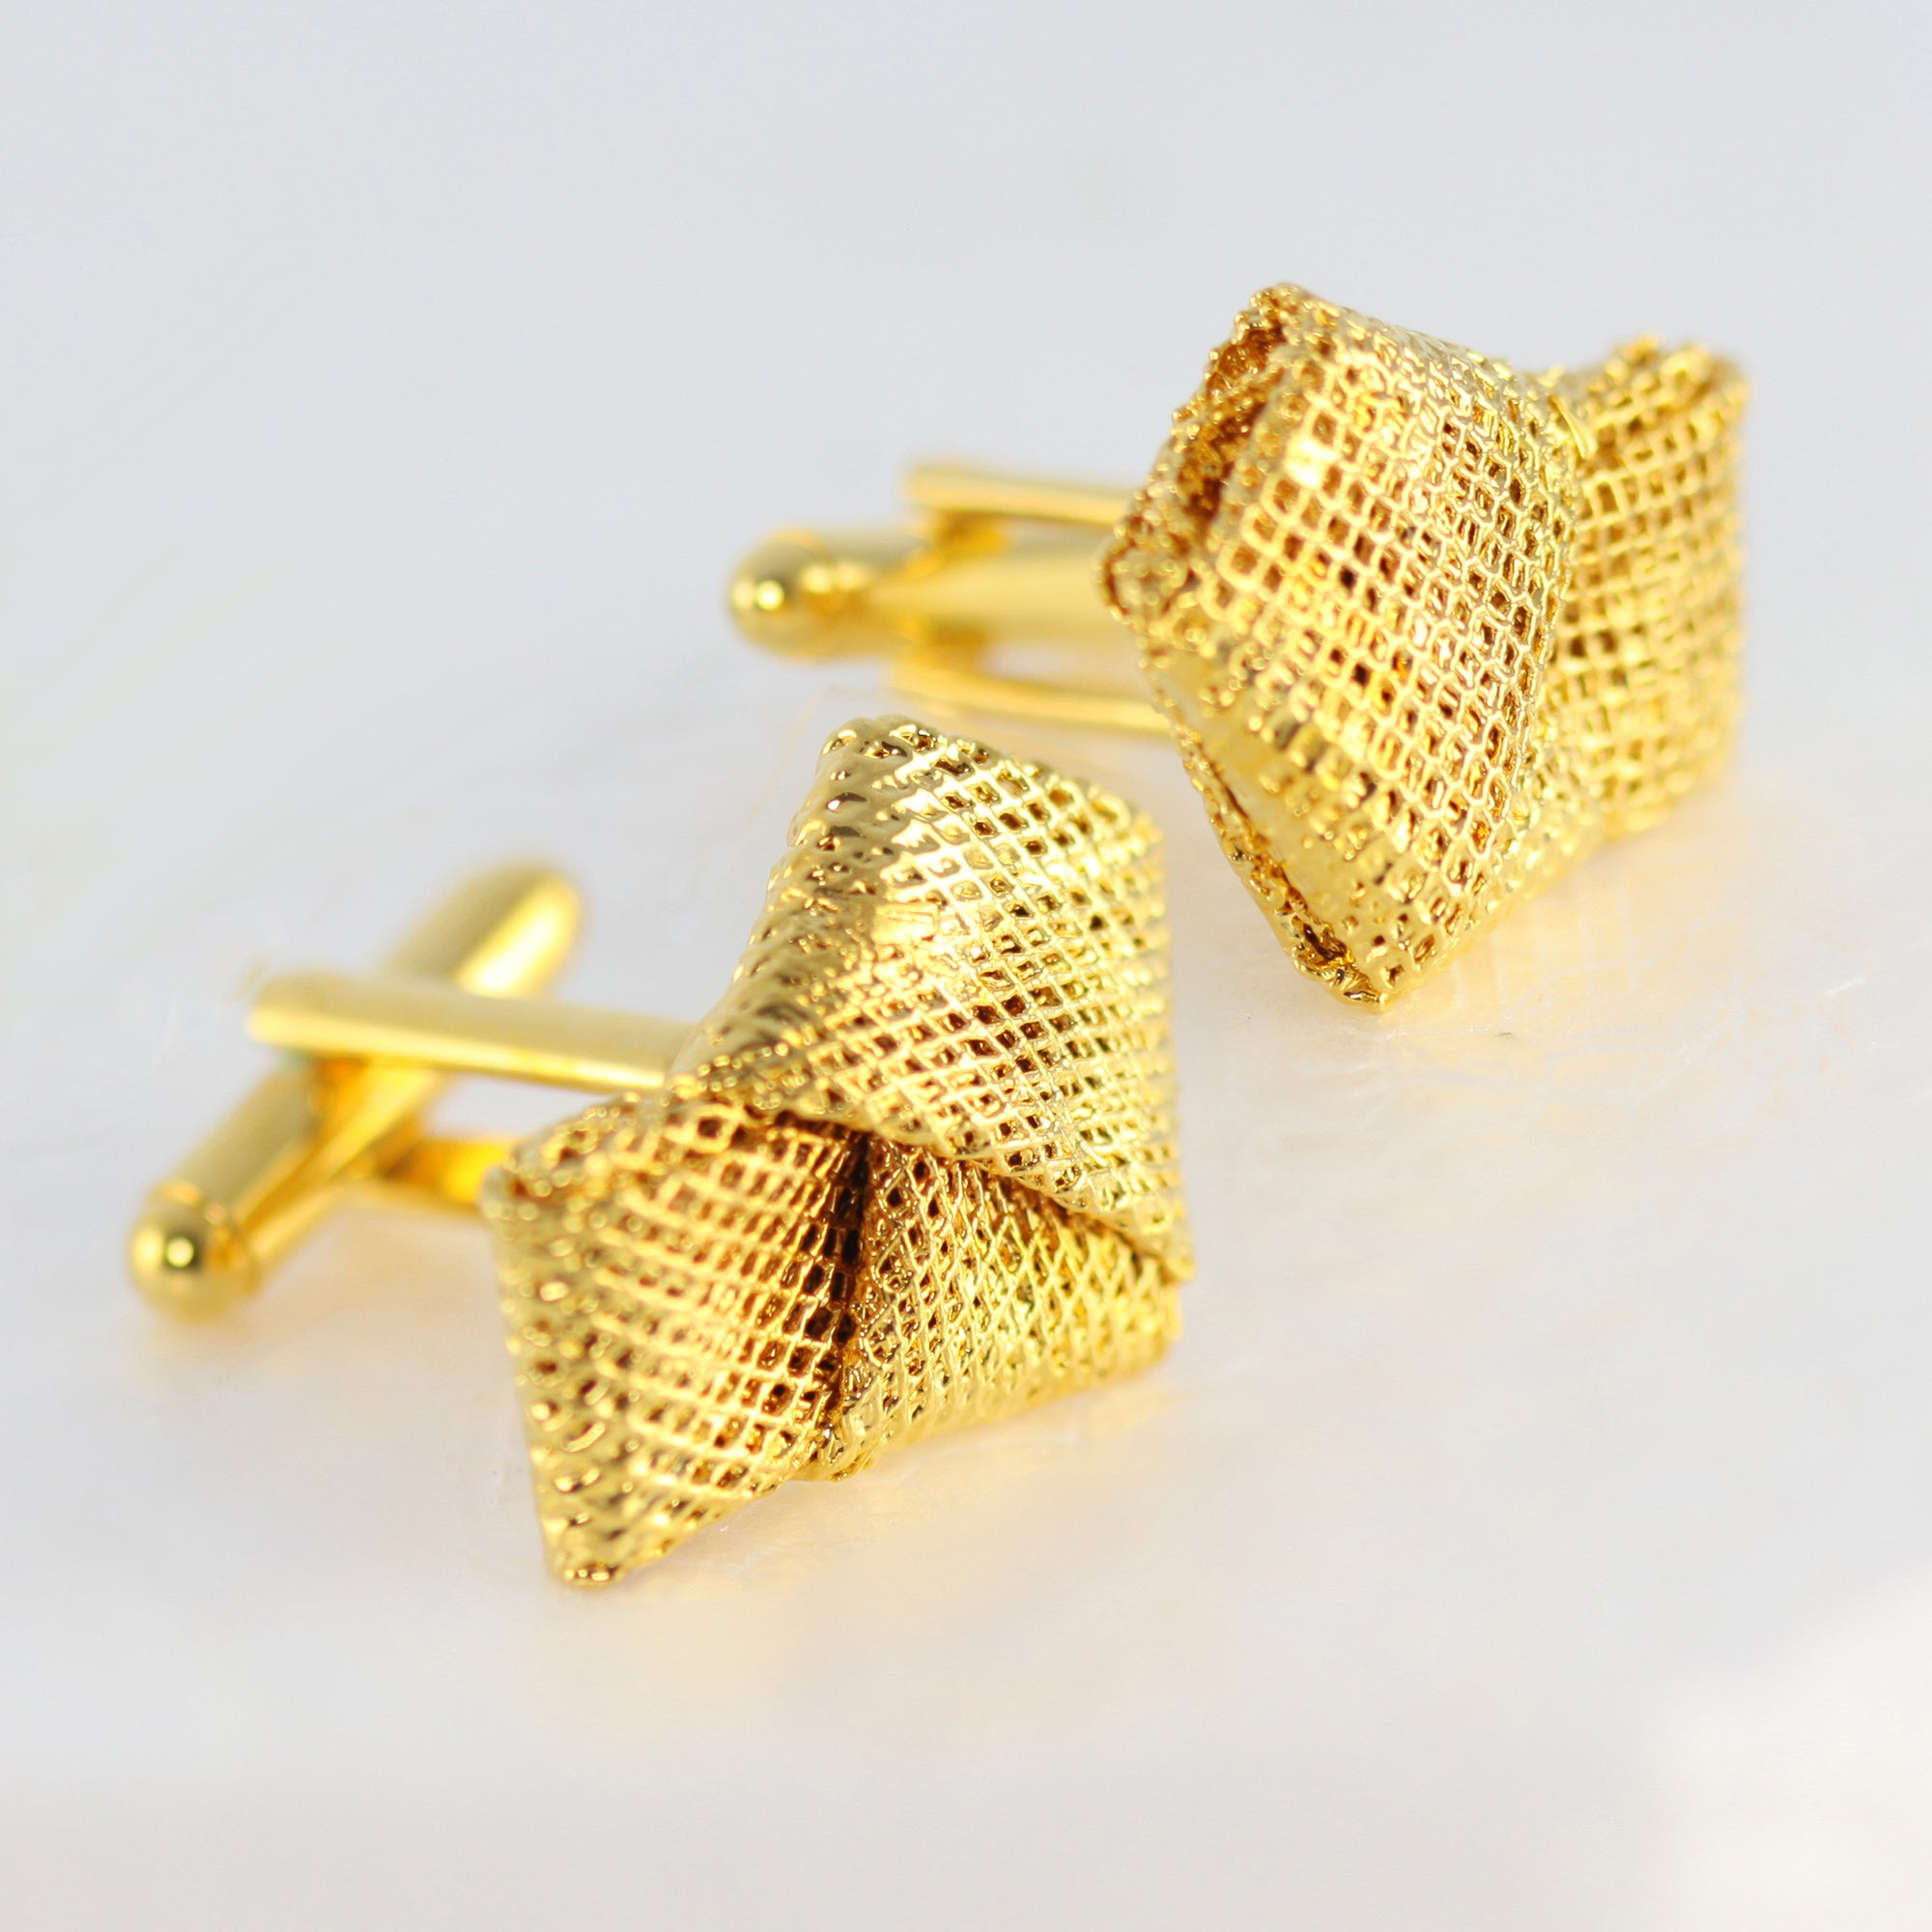 Cufflinks made from wedding dress tulle tied in a knot and dipped in 24k gold.